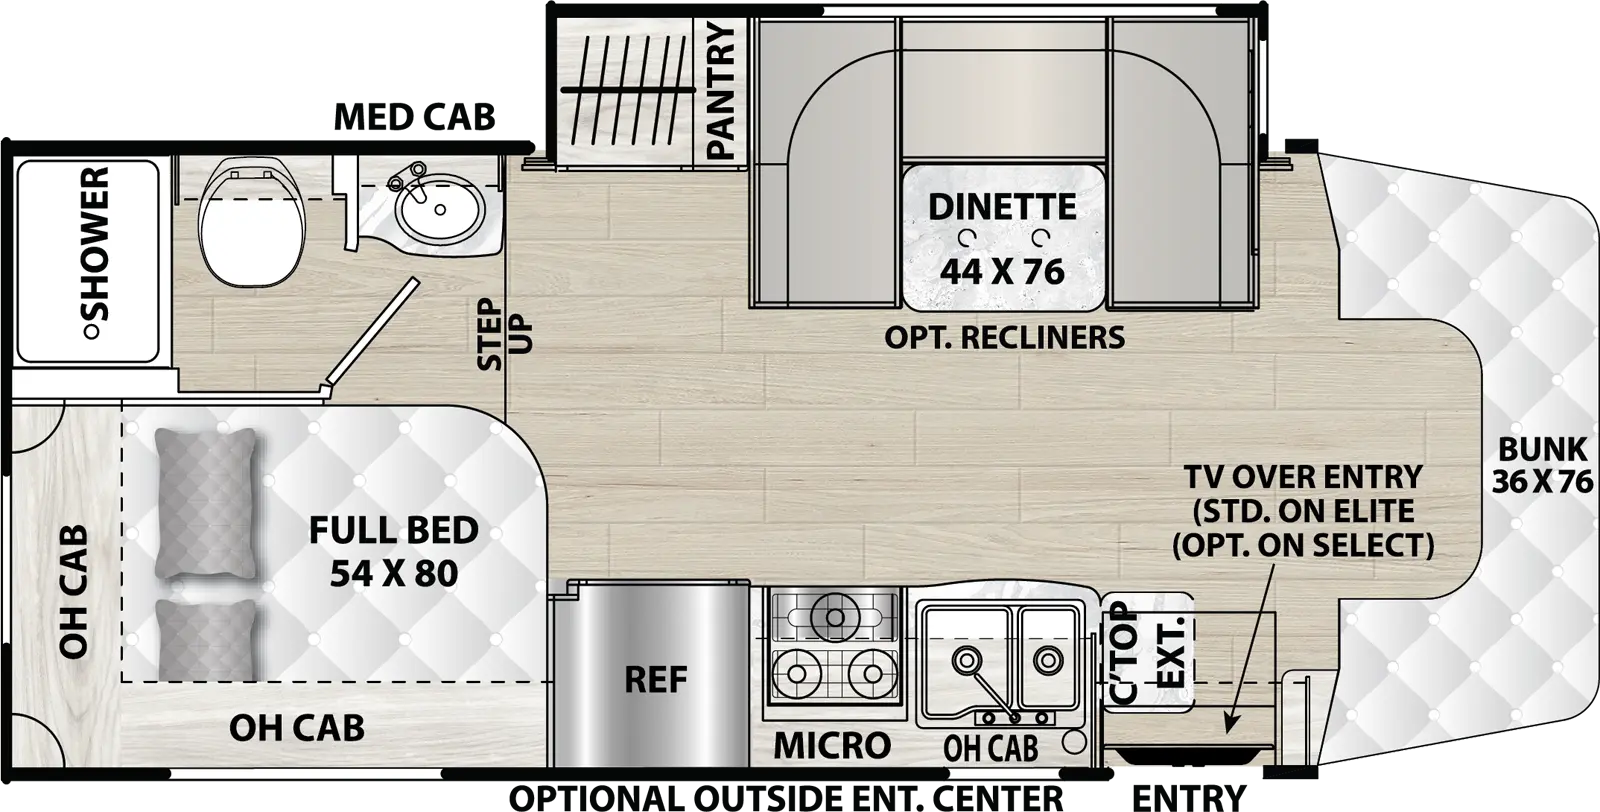 The Prism 24CBS has 1 slideout located on the off-door side and 1 entry door. Interior layout from front to back; front 36 inch by 76 inch bunk; door side kitchen with stovetop with microwave, overhead cabinets, double basin sink, refrigerator and counter extension; off-door  44 inch by 76 inch U-dinette, next to pantry; rear door side 54 inch by 80 inch foot facing full bed with overhead cabinets; rear off-door side bathroom with shower, sink, toilet and medicine cabinet. TV over entry is standard on Elite and Optional on select; Optional Exterior door side entertainment center; optional recliners in place of dinette.